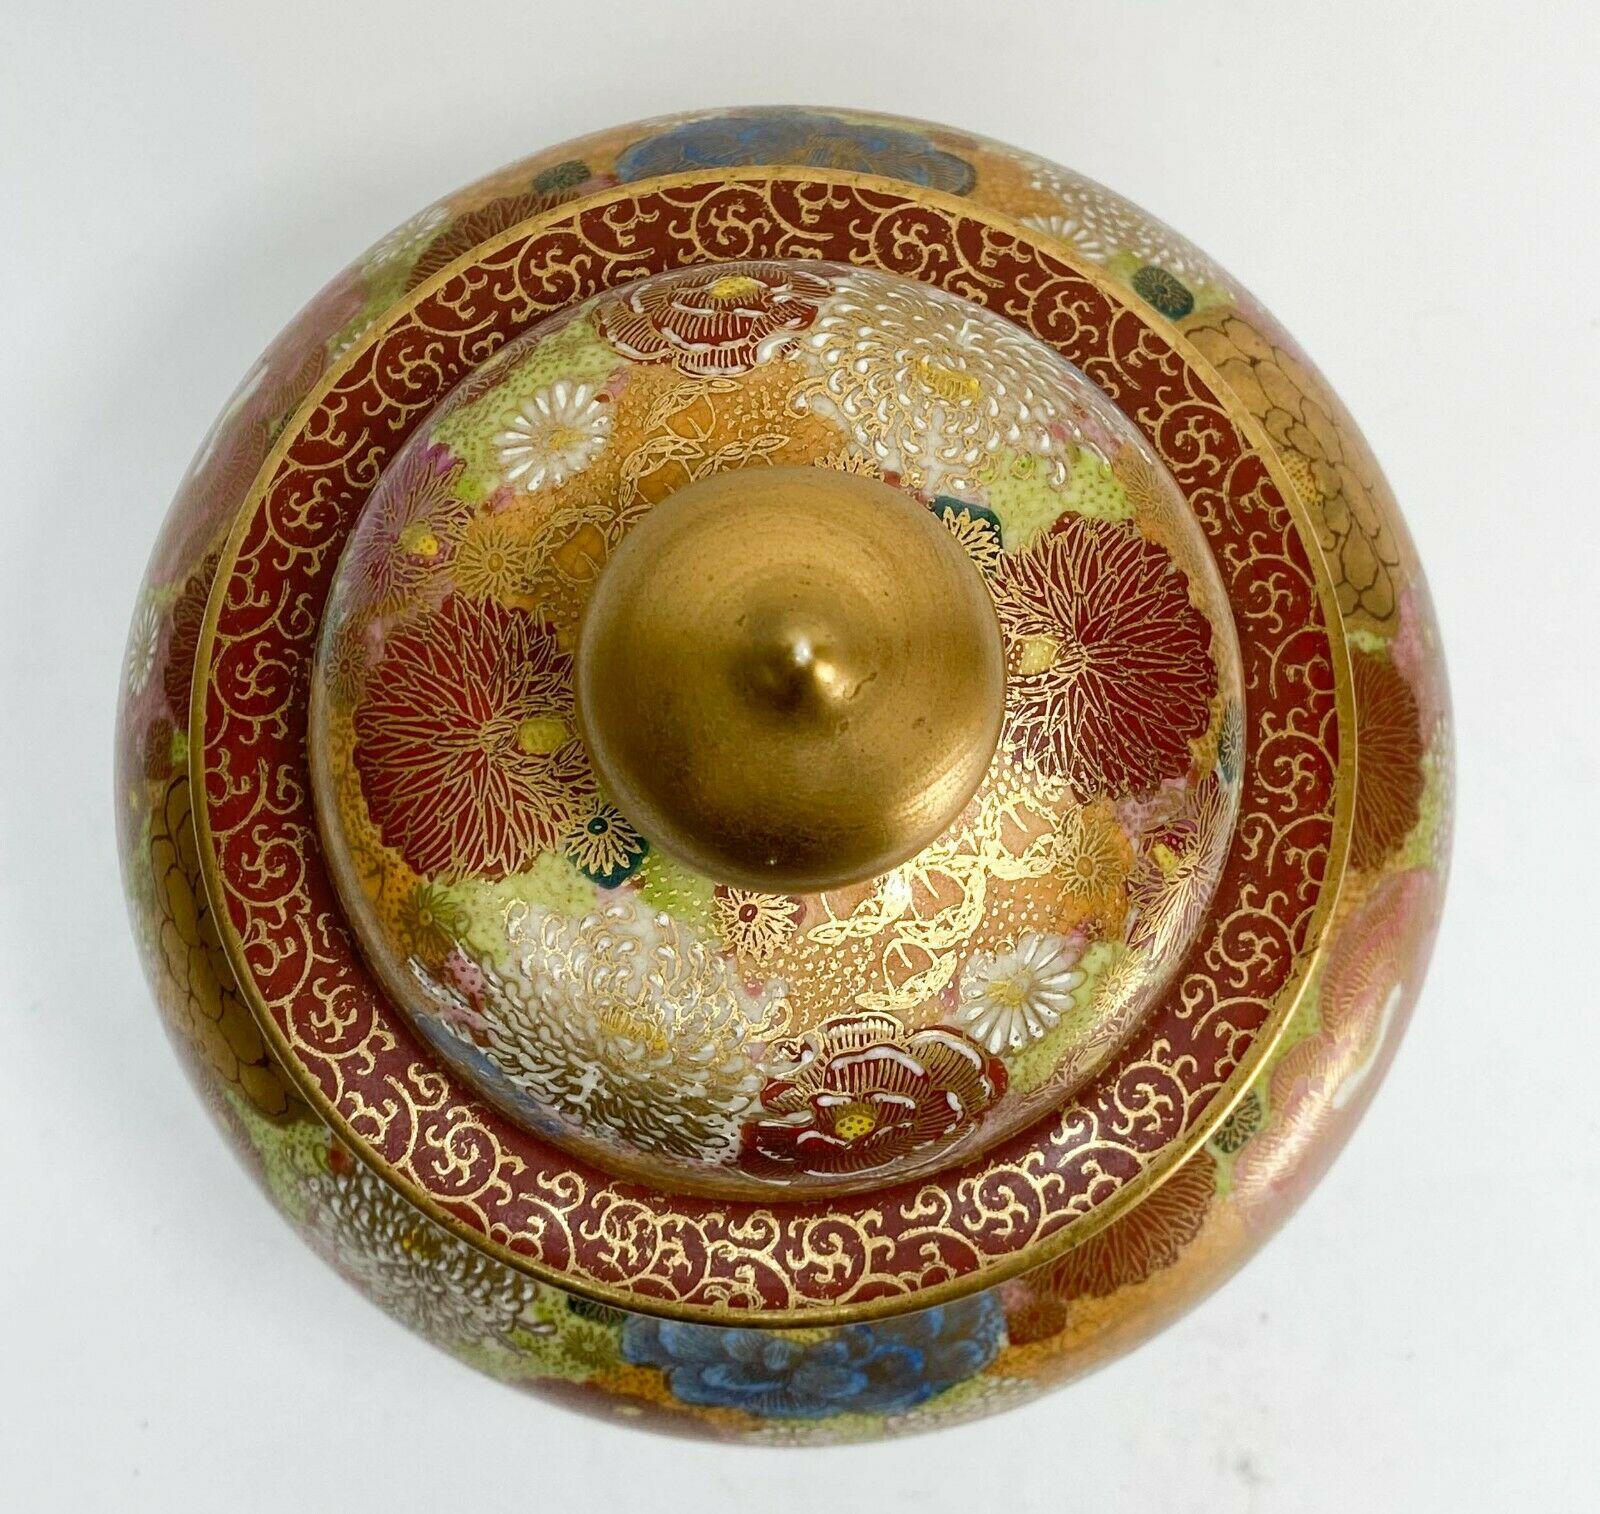 Japanese Satsuma Mille Fleur Hand Painted Porcelain lidded urn, Possibly Meiji

Colorful ground covered in gilt hand painted flowers throughout. Japanese mark to underside.

Additional Information:
Featured Refinements: satsuma vase 
Region of